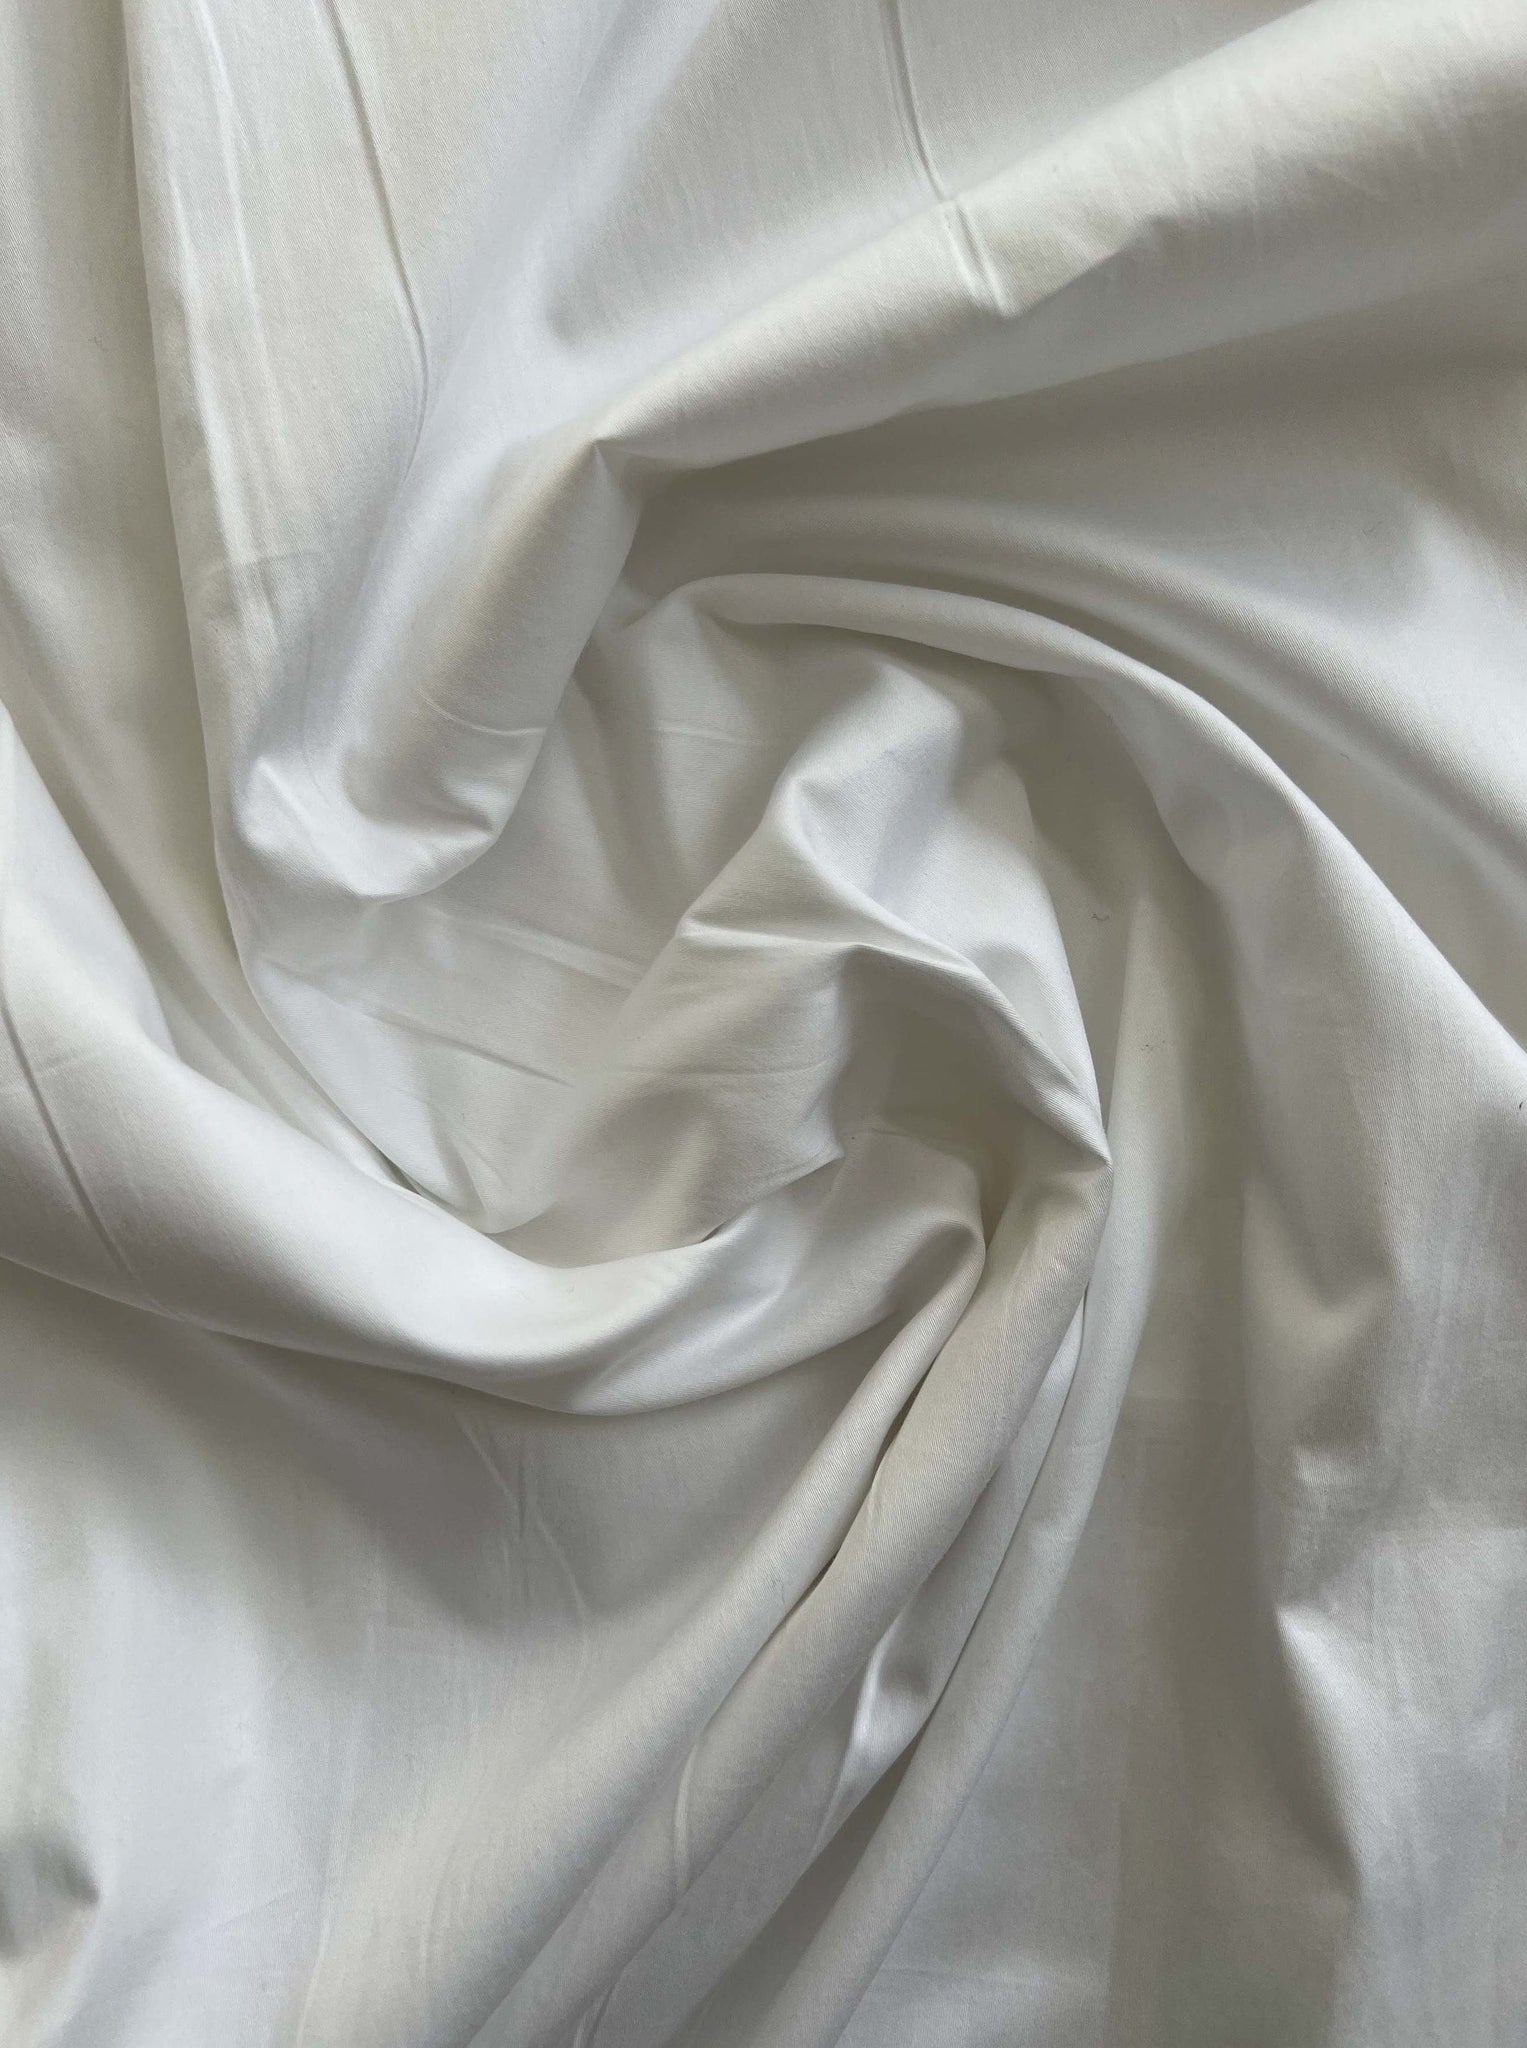 A close up of a Dolores Dress - White fabric.